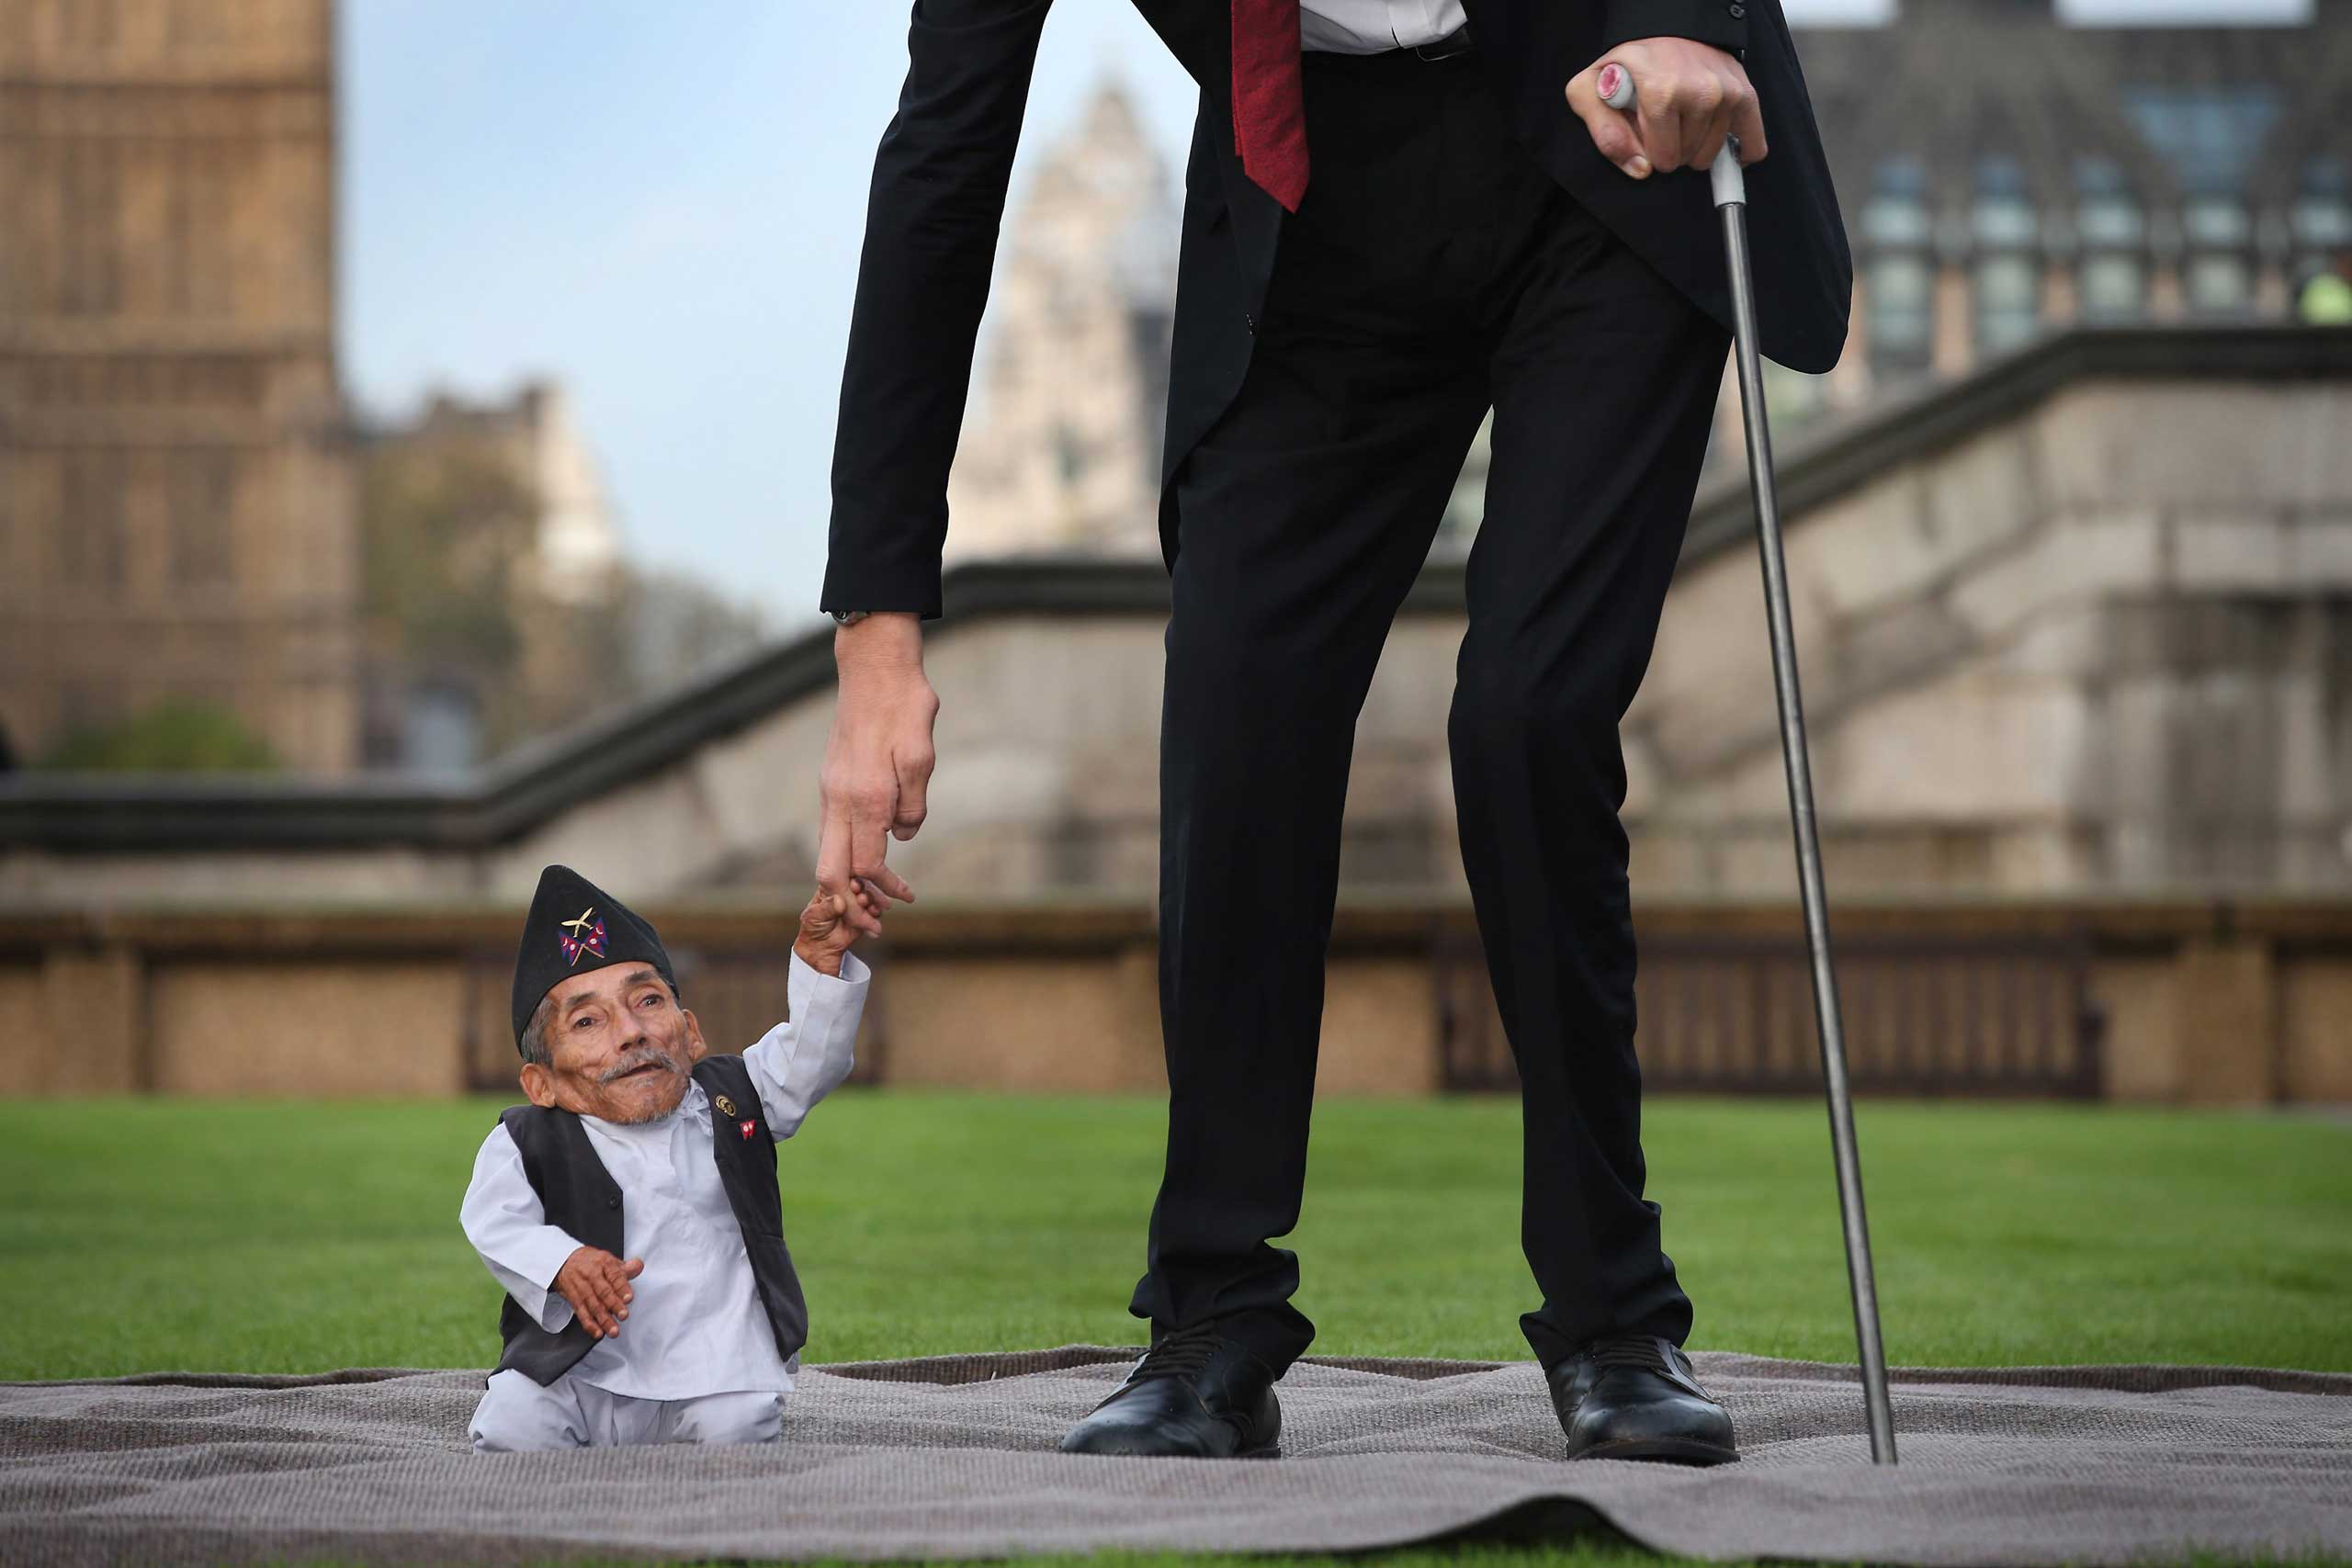 Nov. 13, 2014. Chandra Bahadur Dangi, the shortest man ever, meets the worlds tallest man, Sultan Kosen, for the first time in London. Dangi from Nepal is 21.5-in. tall, and Kosen from Turkey is 8 ft. 3 in.